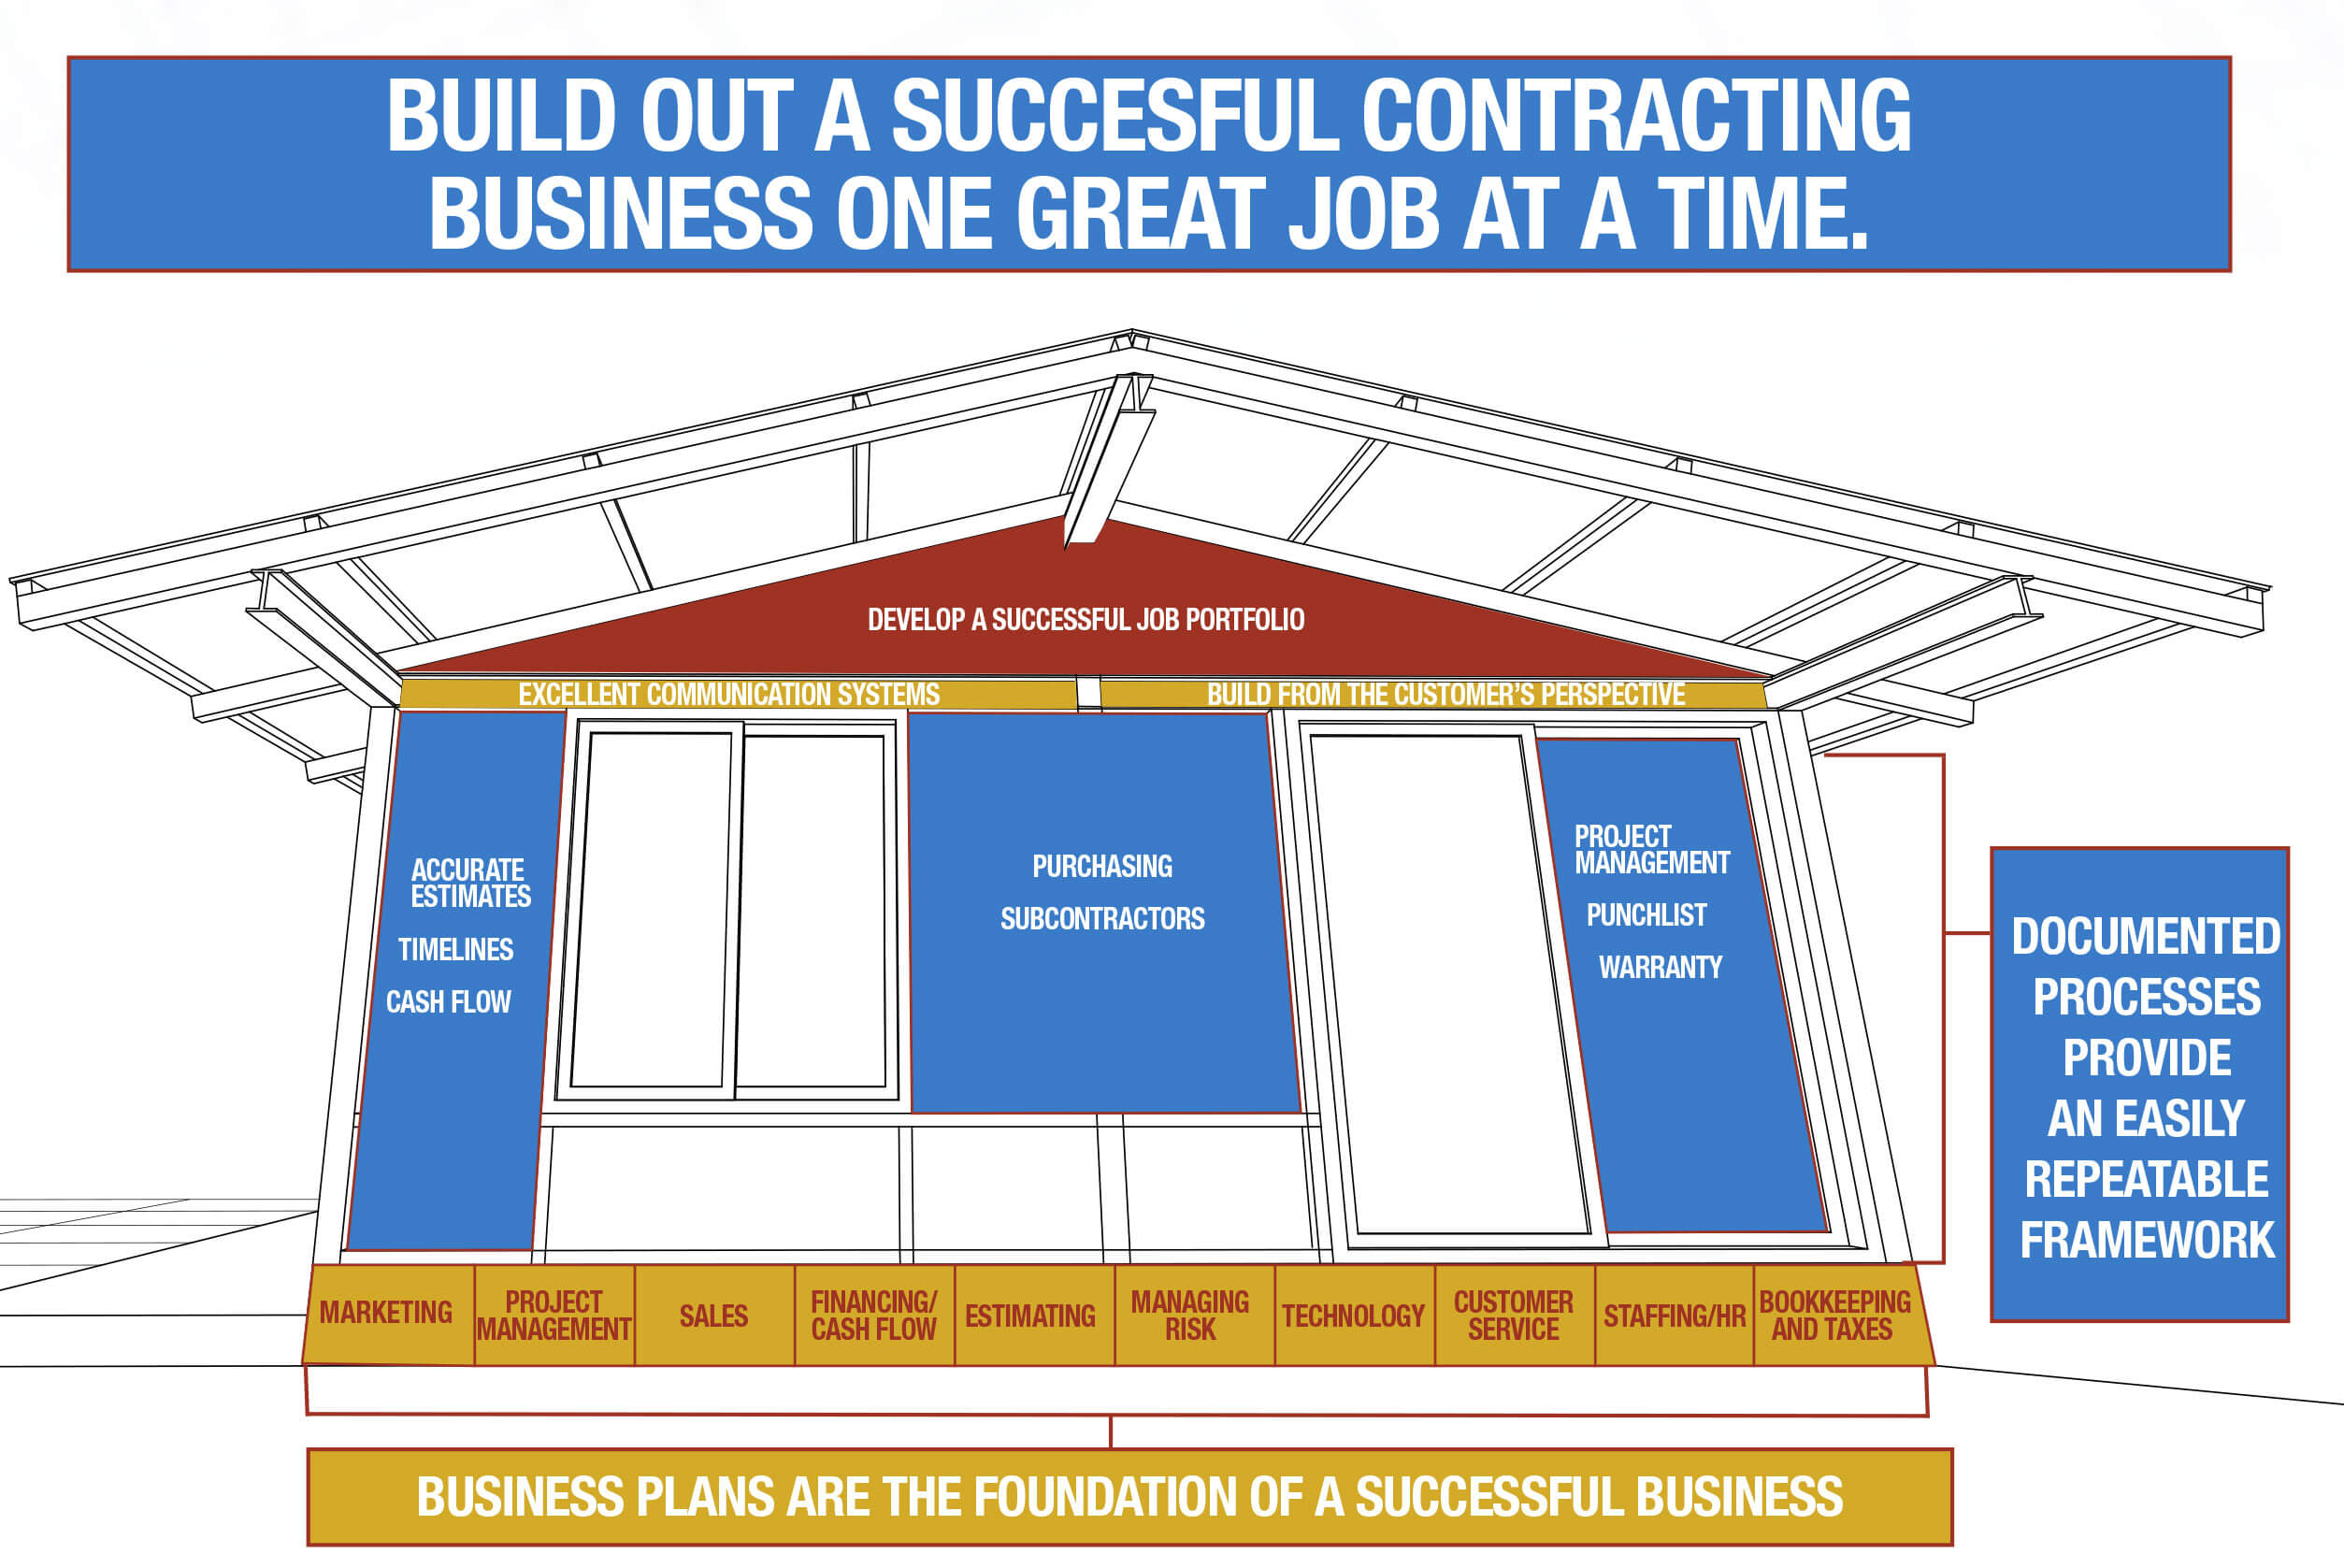 Chart on how to build a successful contracting business.